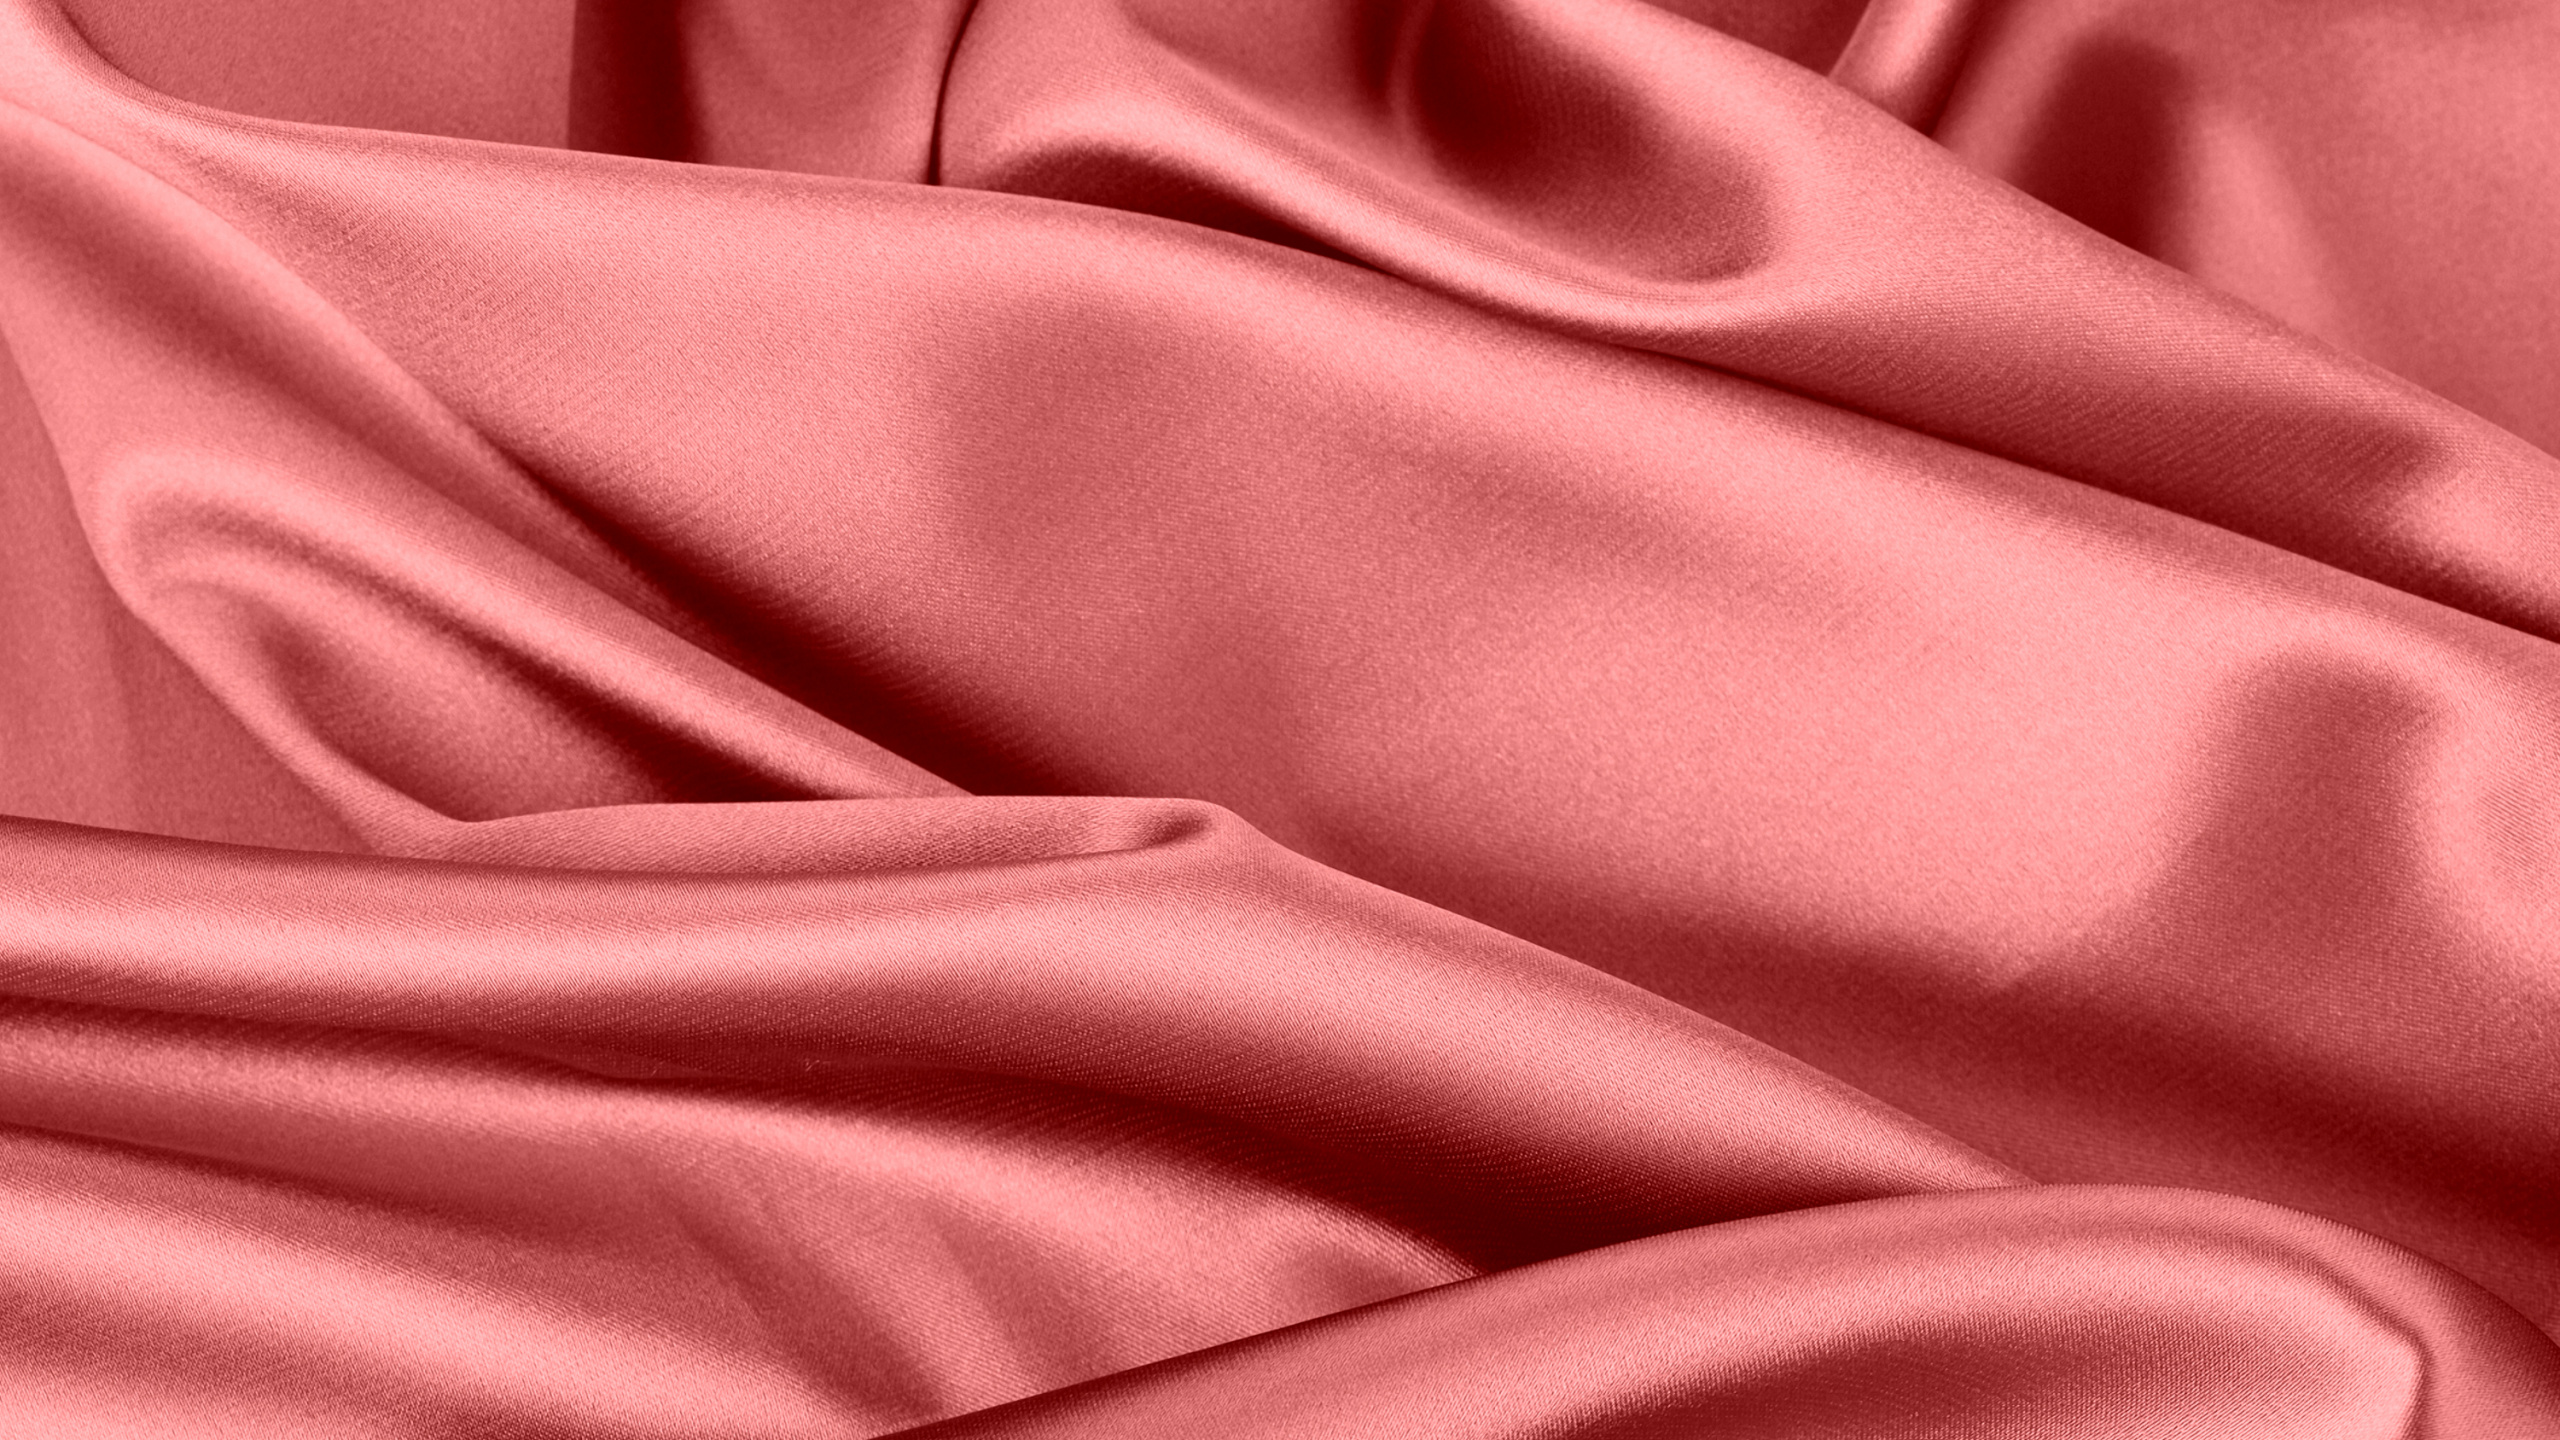 Red Textile in Close up Photography. Wallpaper in 2560x1440 Resolution